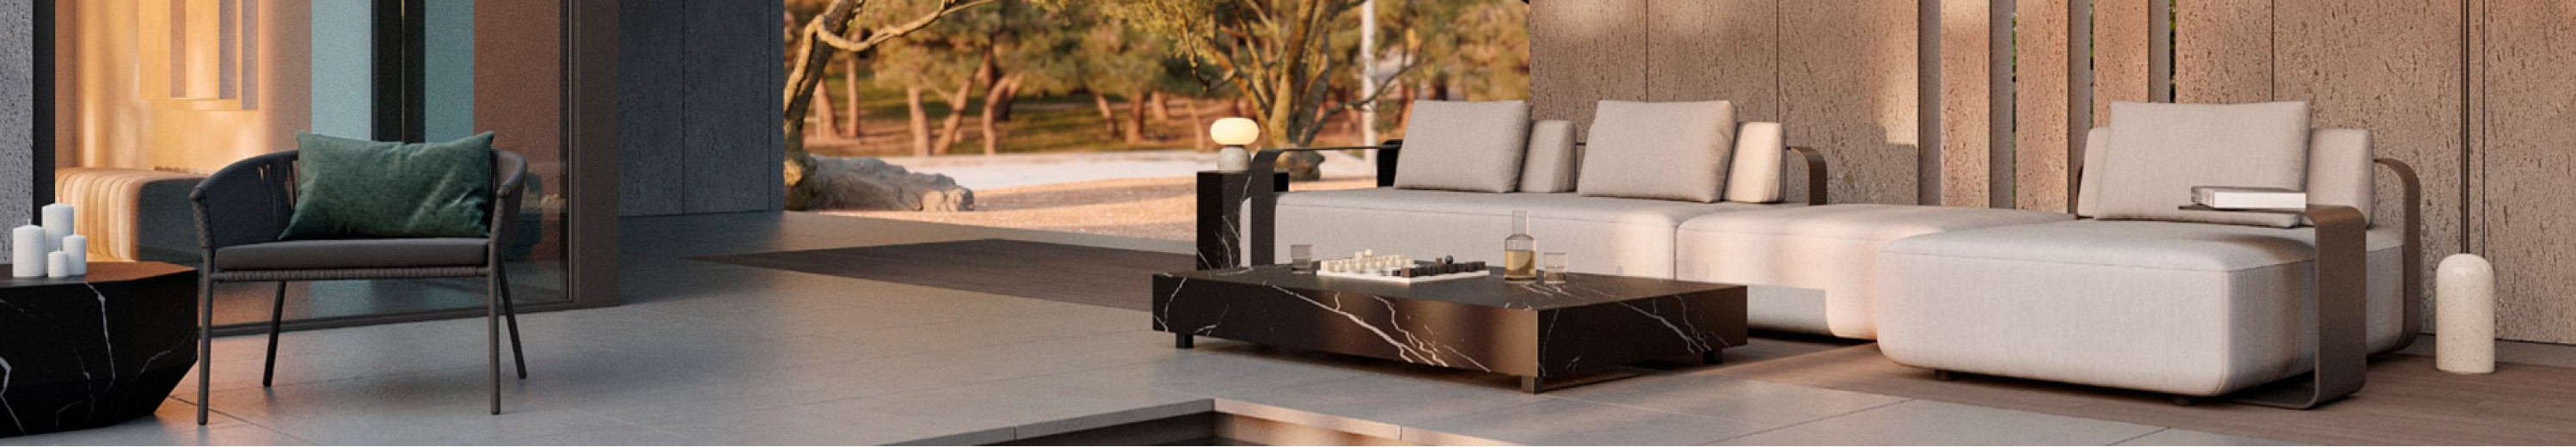 Rove Outdoor Furniture Sets